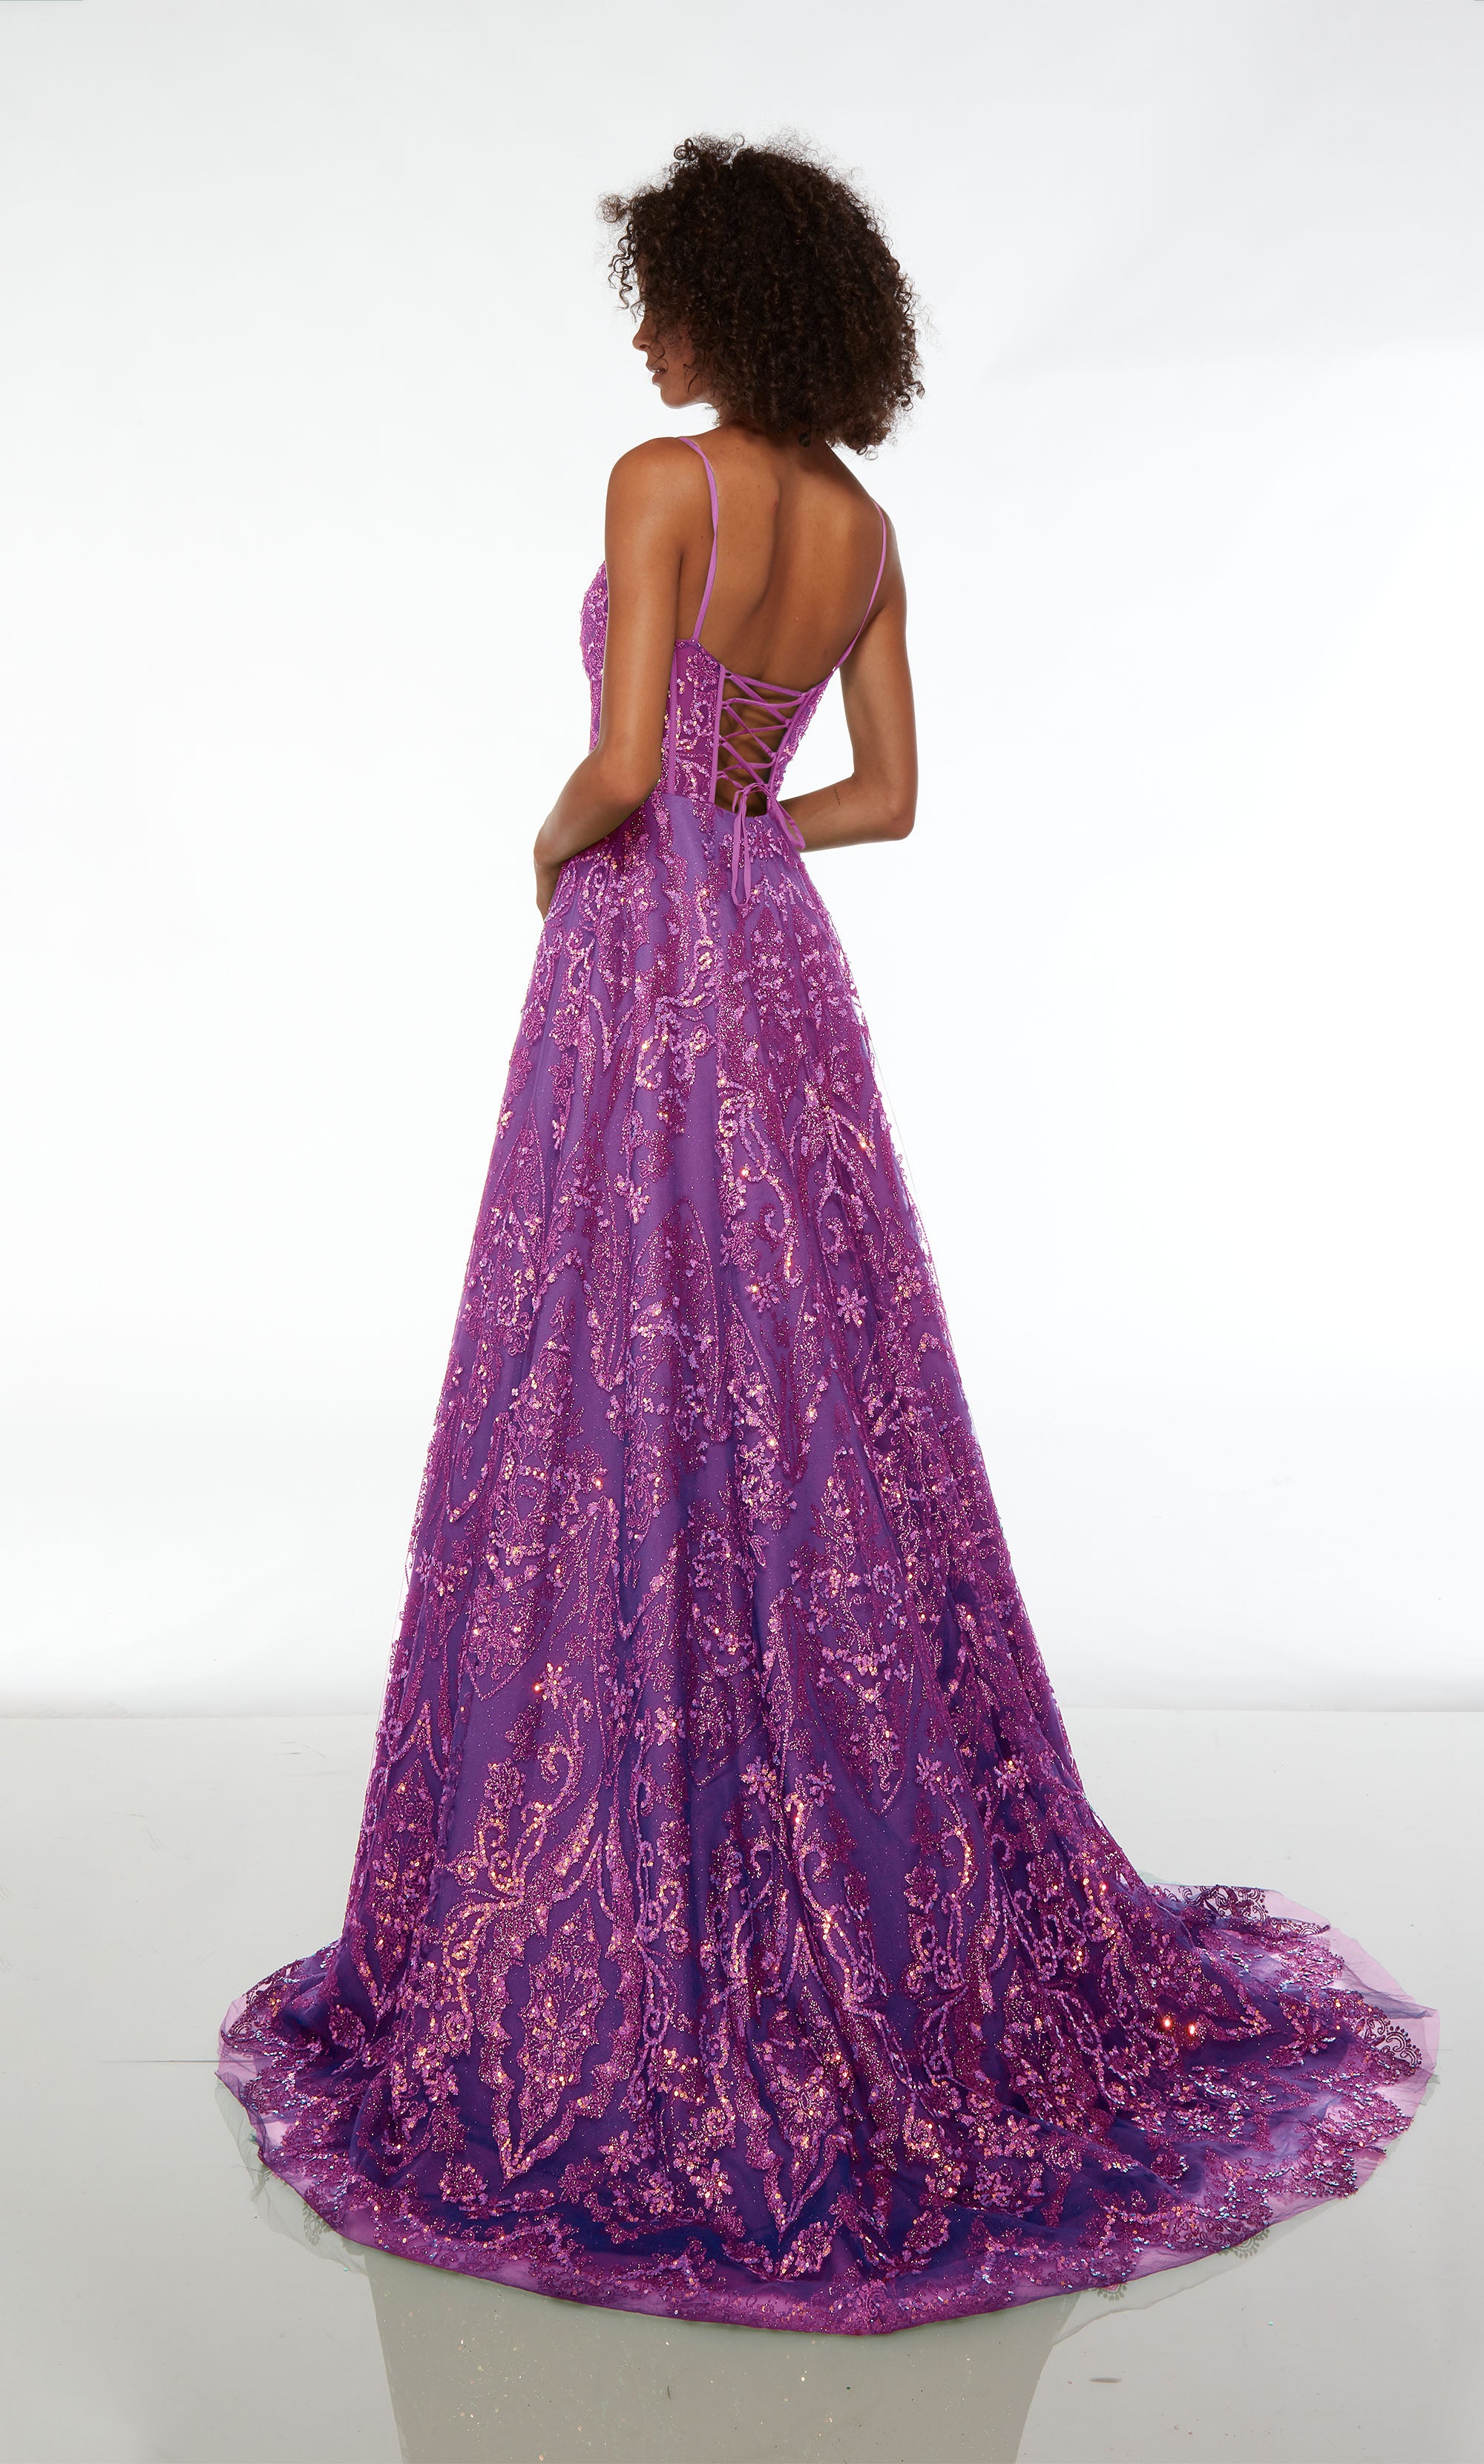 Purple prom dress: plunging neckline, corset top, spaghetti straps, A-line skirt, lace-up back, train, glitter embellishments—unique and captivating.